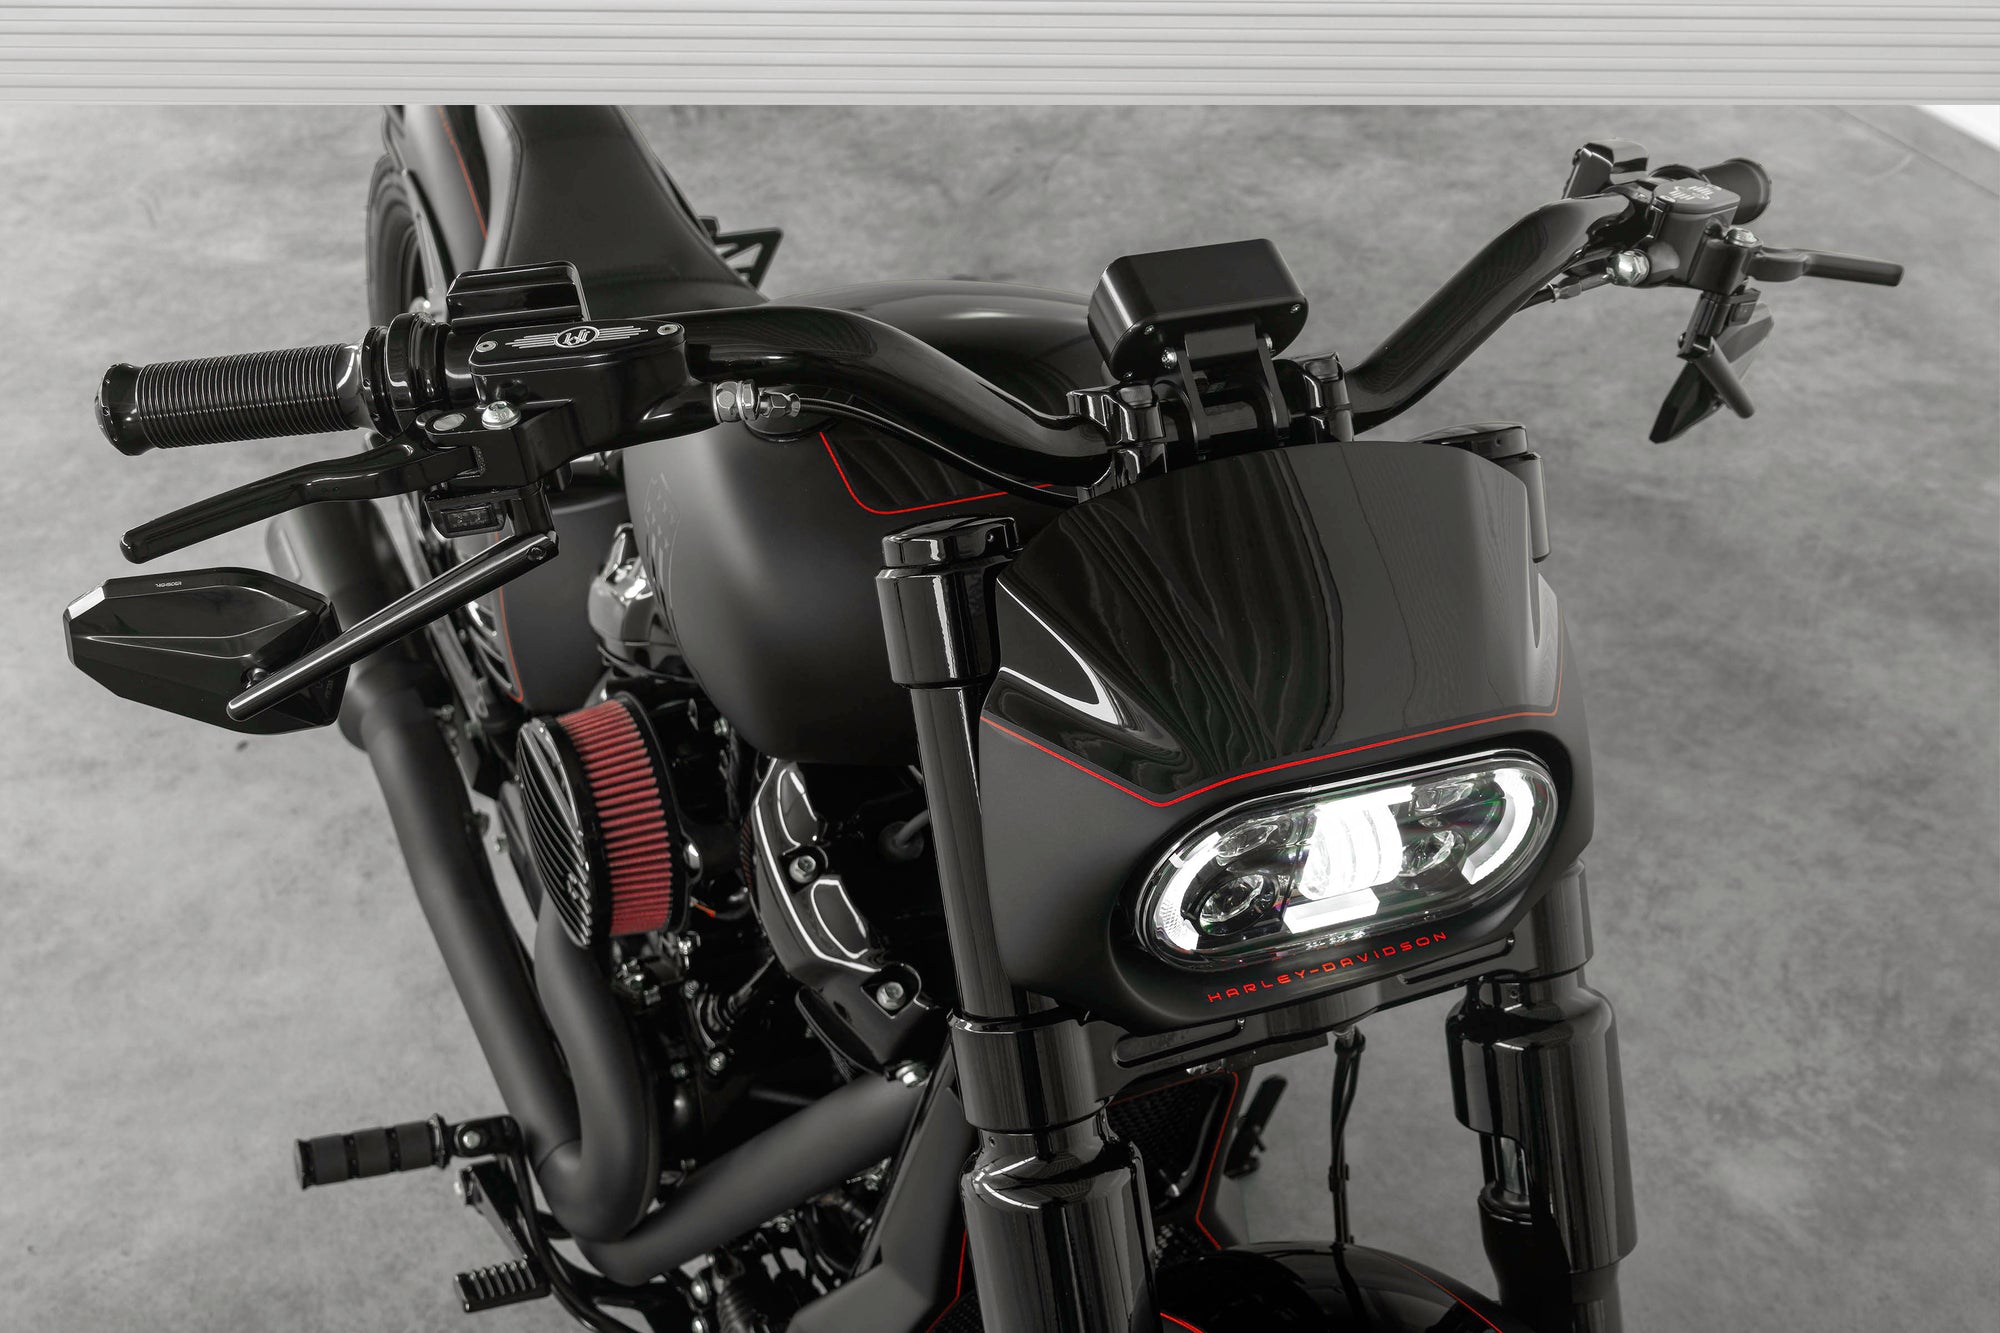 Zoomed Harley Davidson motorcycle with Killer Custom parts from above grey background